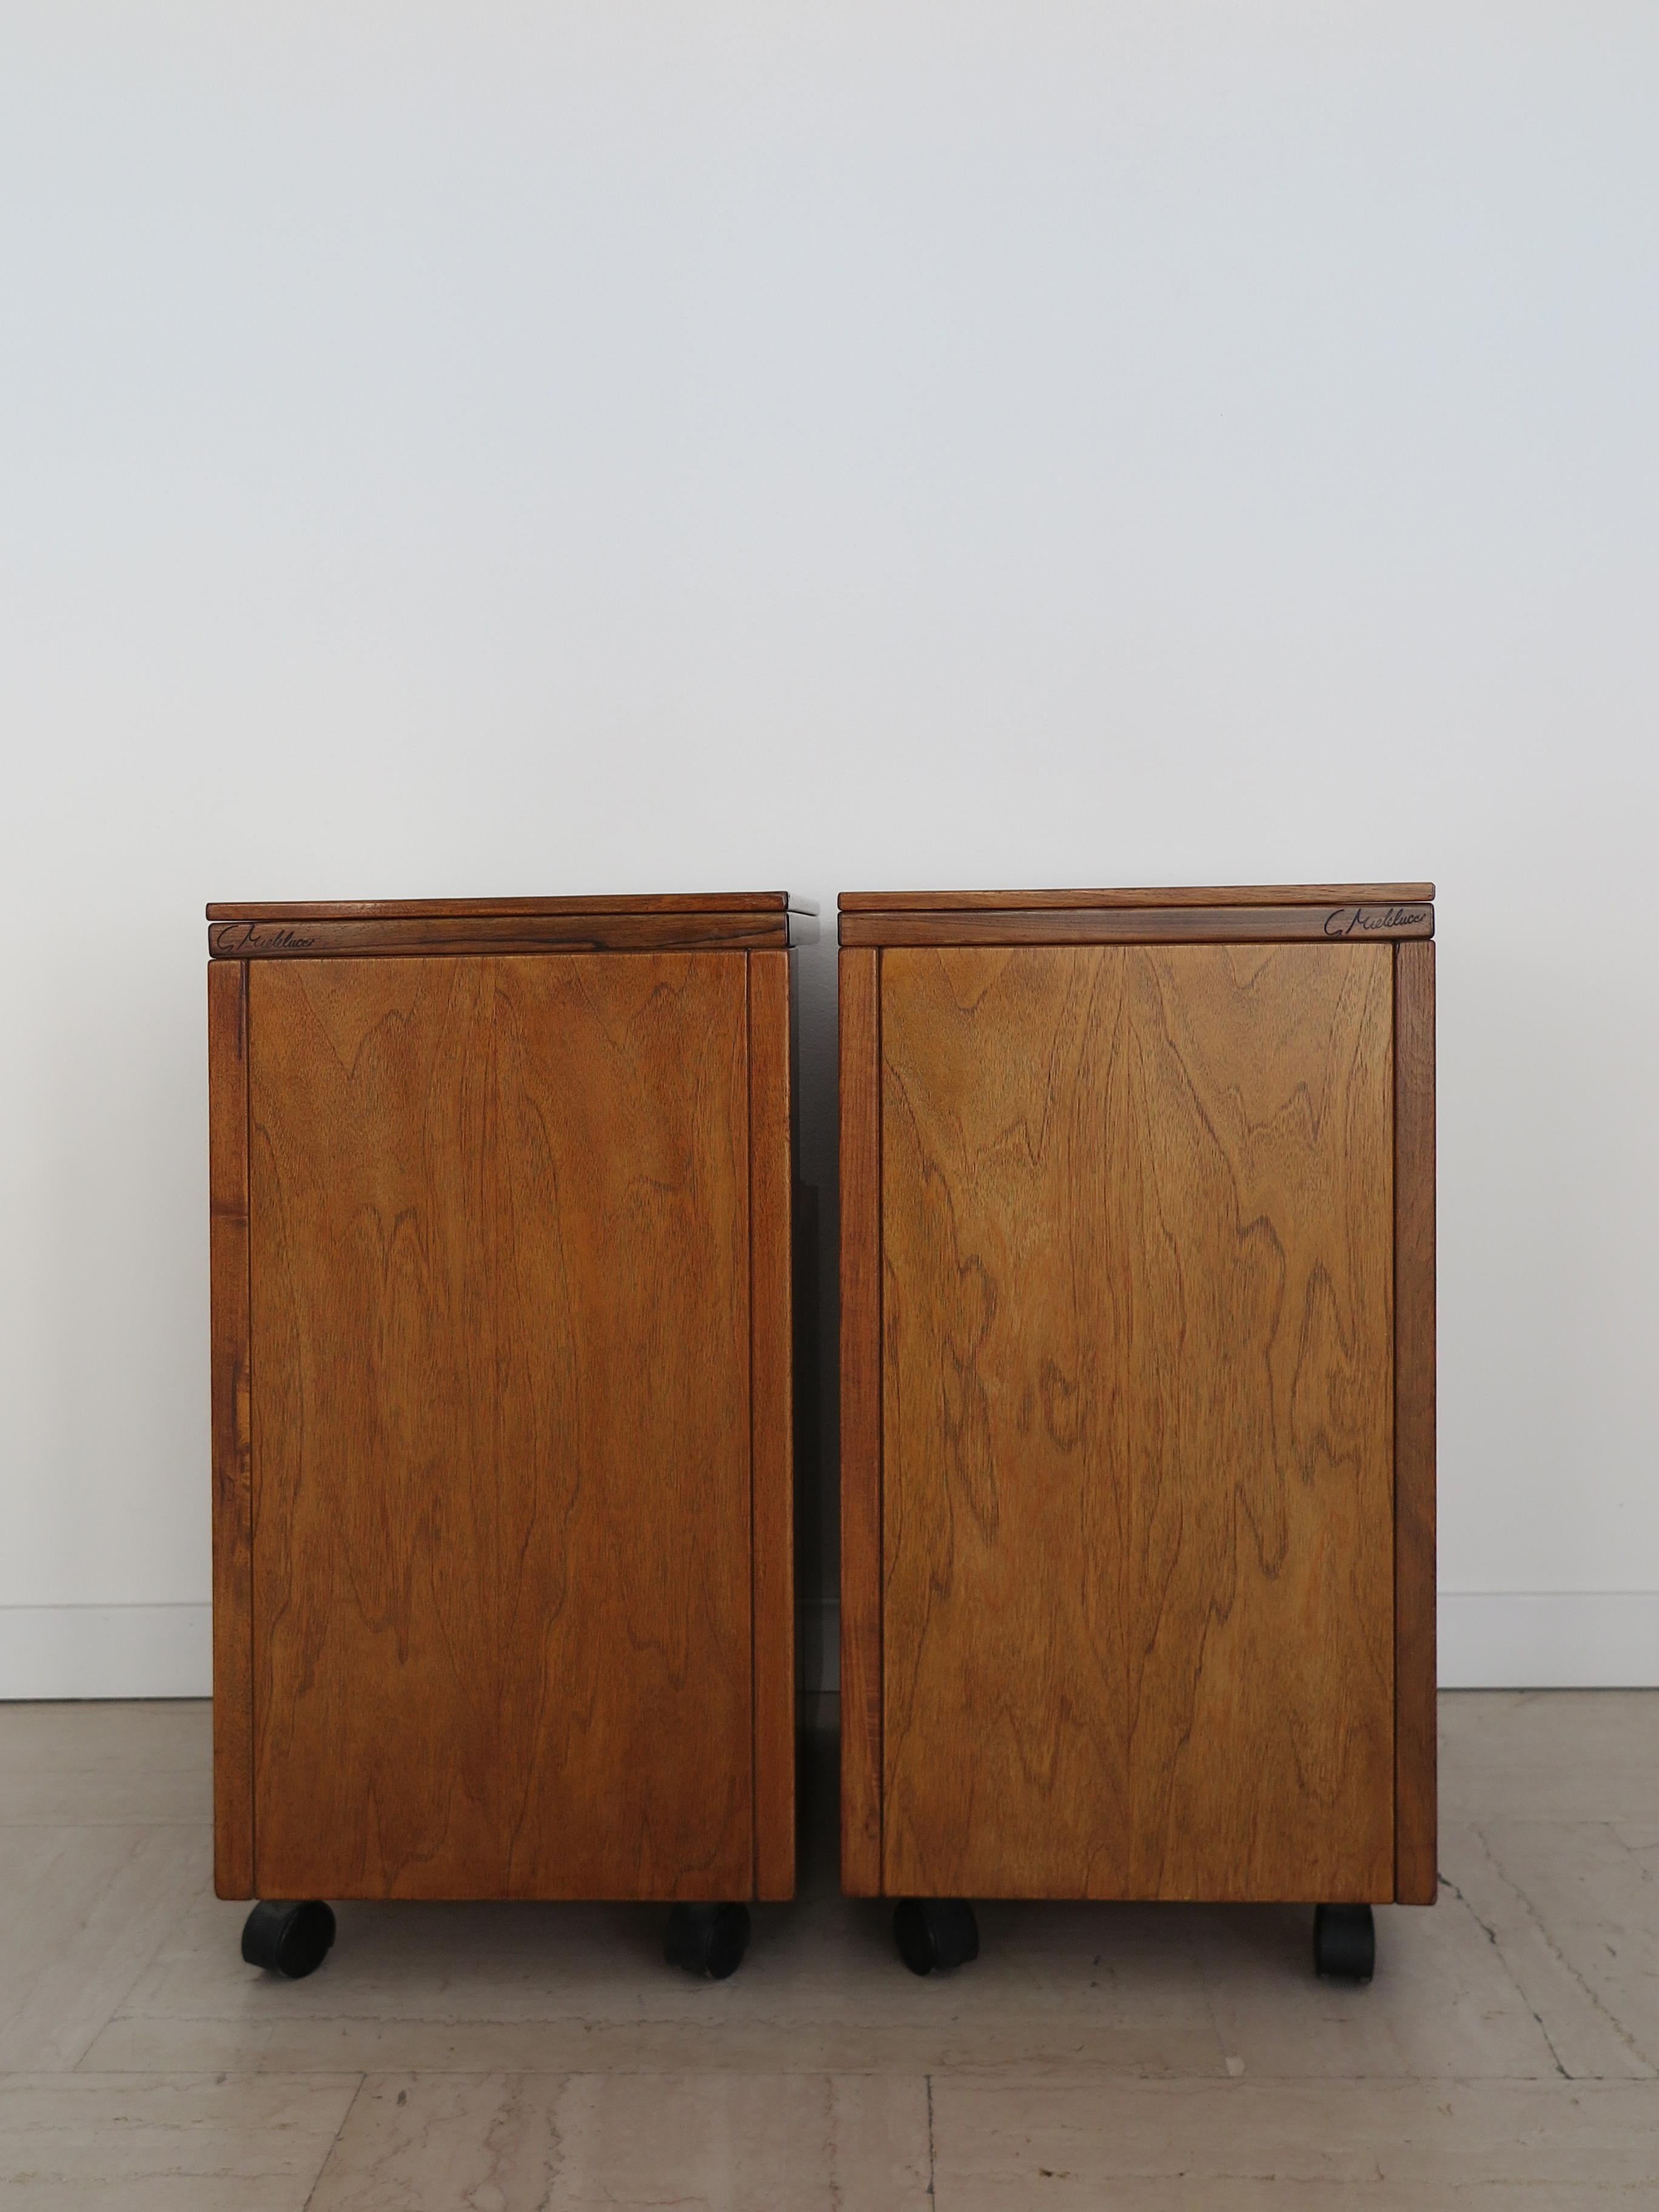 Mid-20th Century Giovanni Michelucci Poltronova Italian Wood Bedside Tables Nithg Stands 1960s For Sale